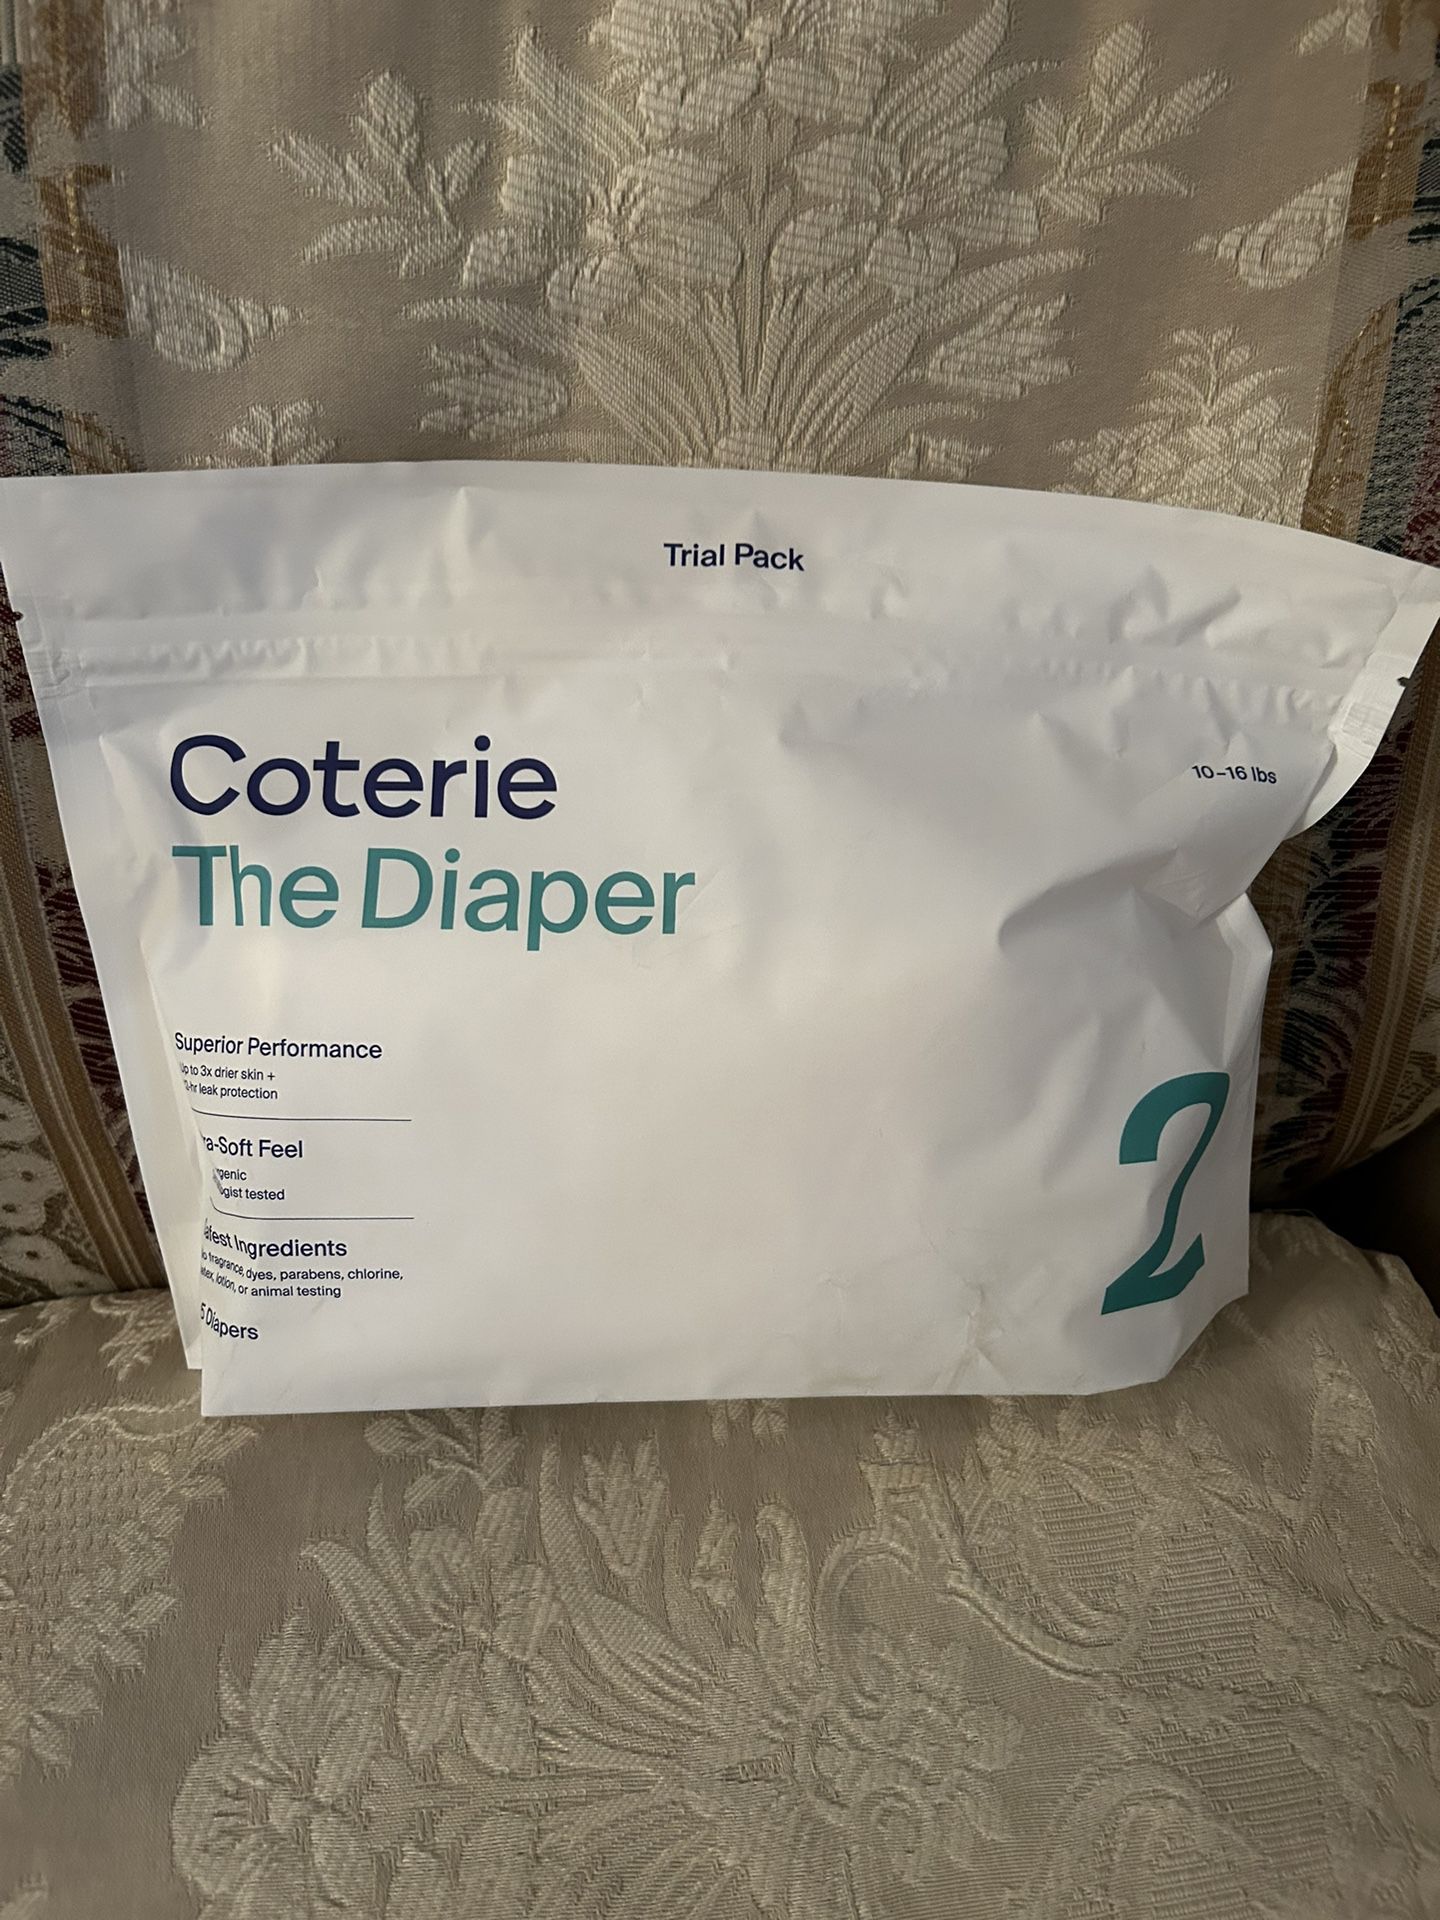 Coterie Diapers 5 Pair 